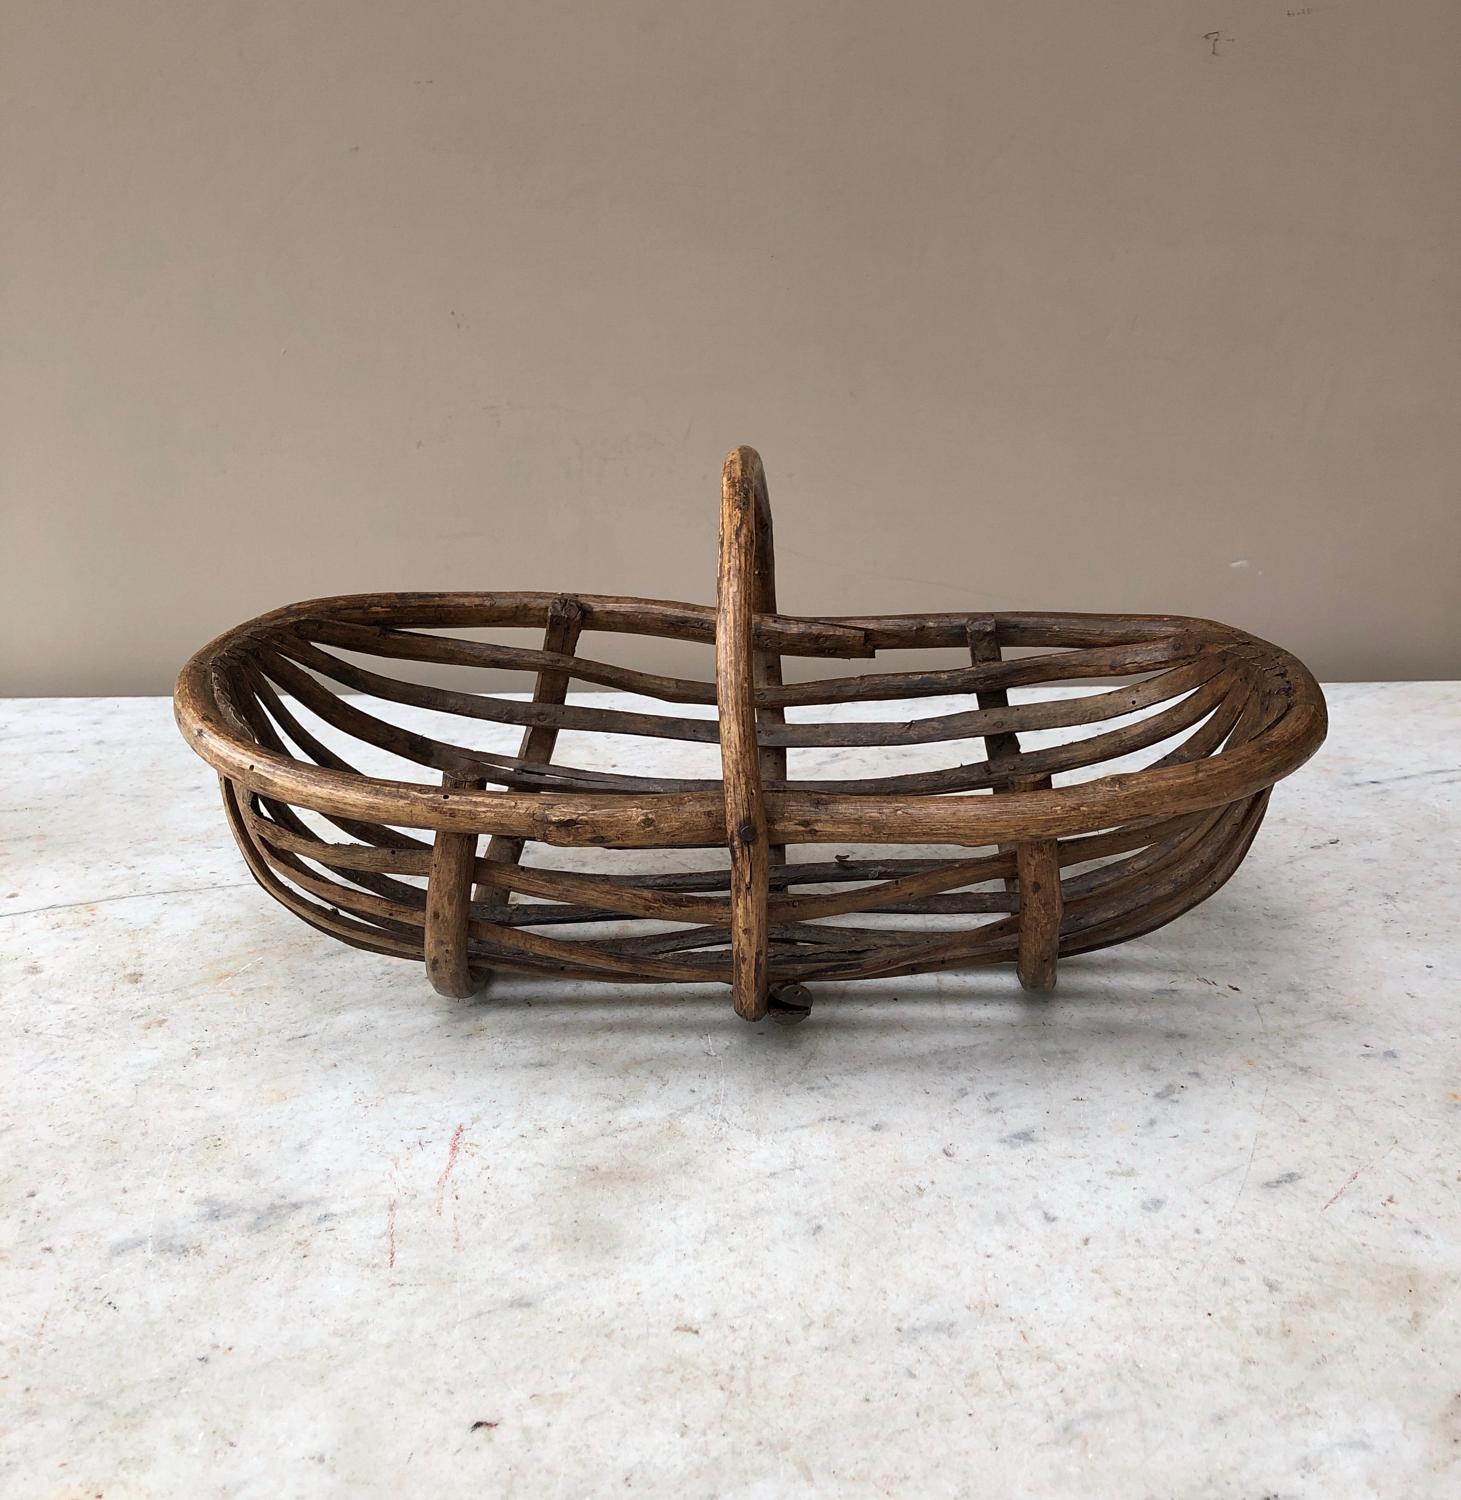 Early 20th Century Wooden Slatted Basket Trug